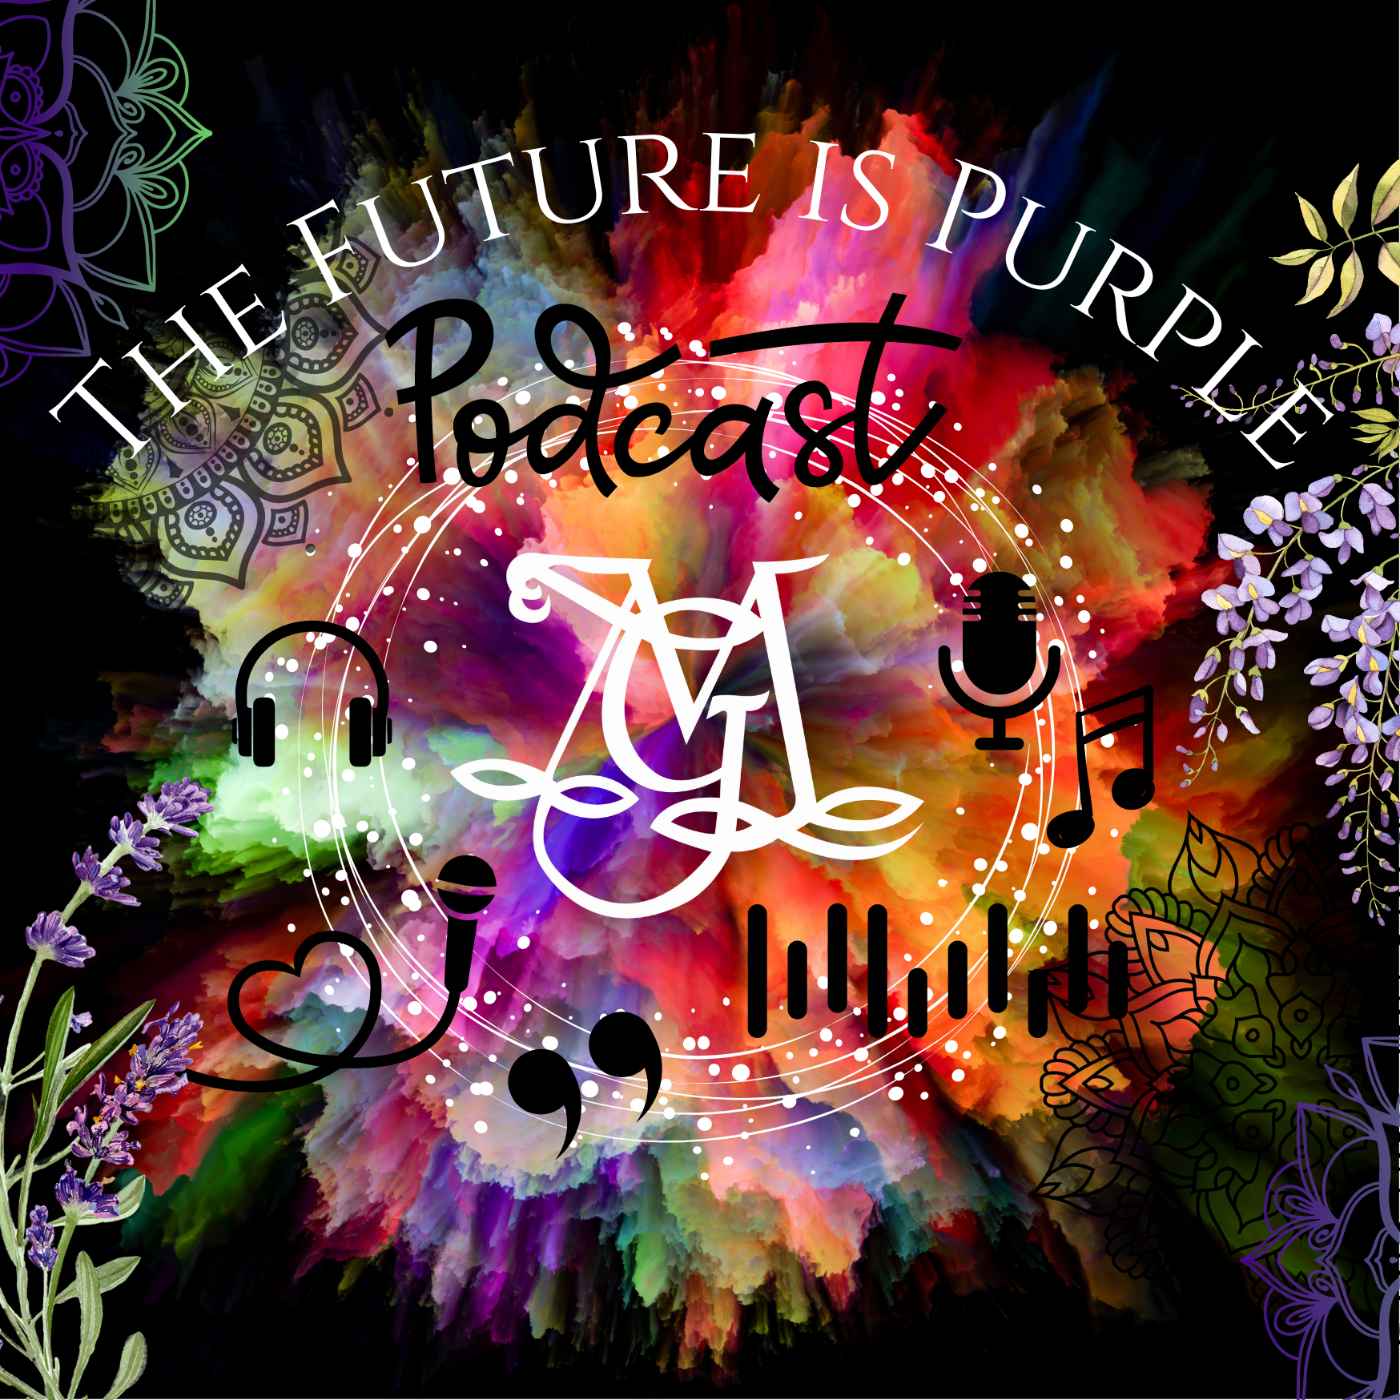 Artwork for The future is purple